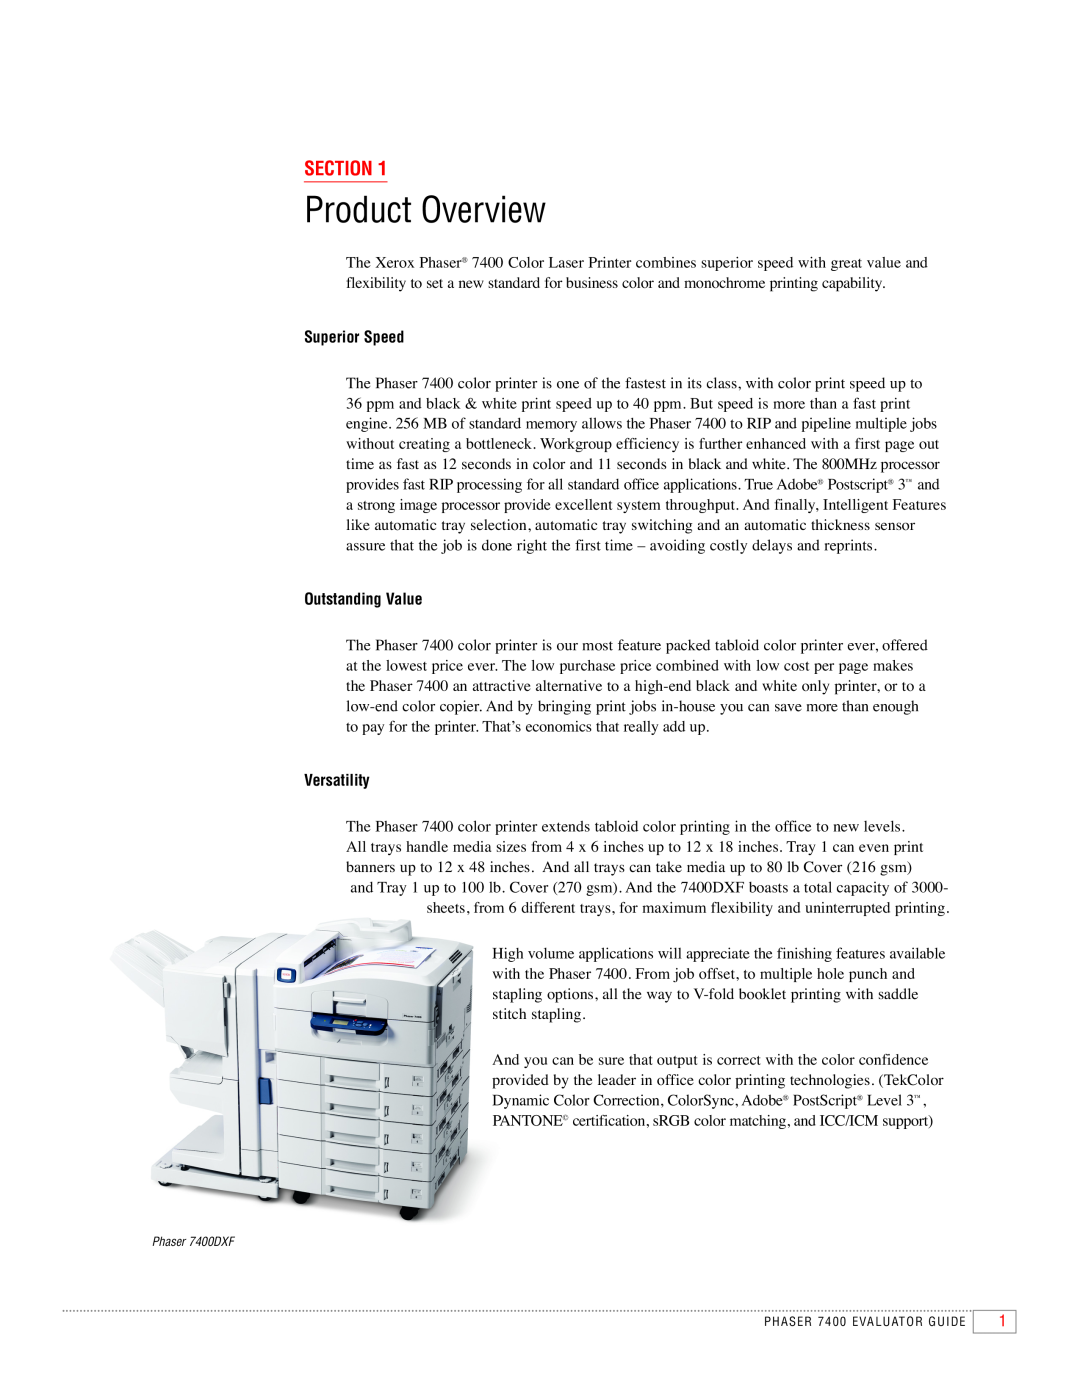 Xerox 7400 manual Product Overview, Section, Superior Speed, Outstanding Value, Versatility 